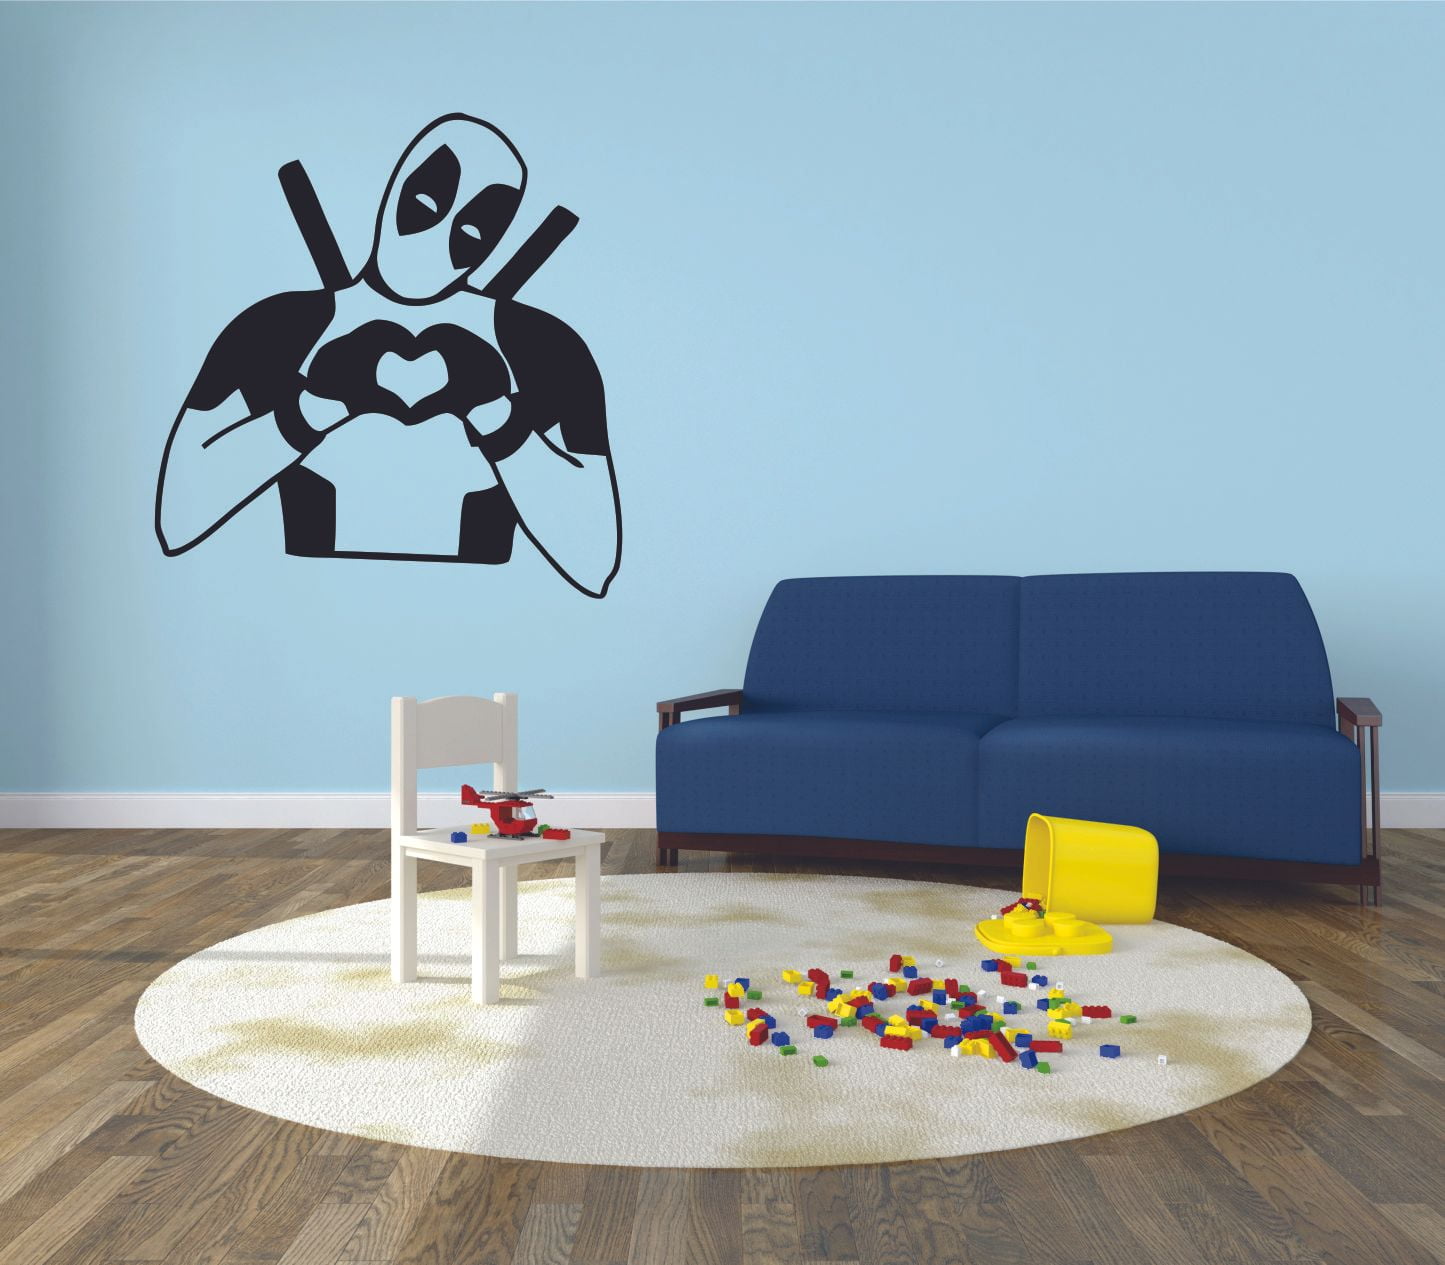 BIG HERO 6 IRON ON TRANSFER T-SHIRT OR STICKER WALL DECAL PERSONALISED LOT BH 